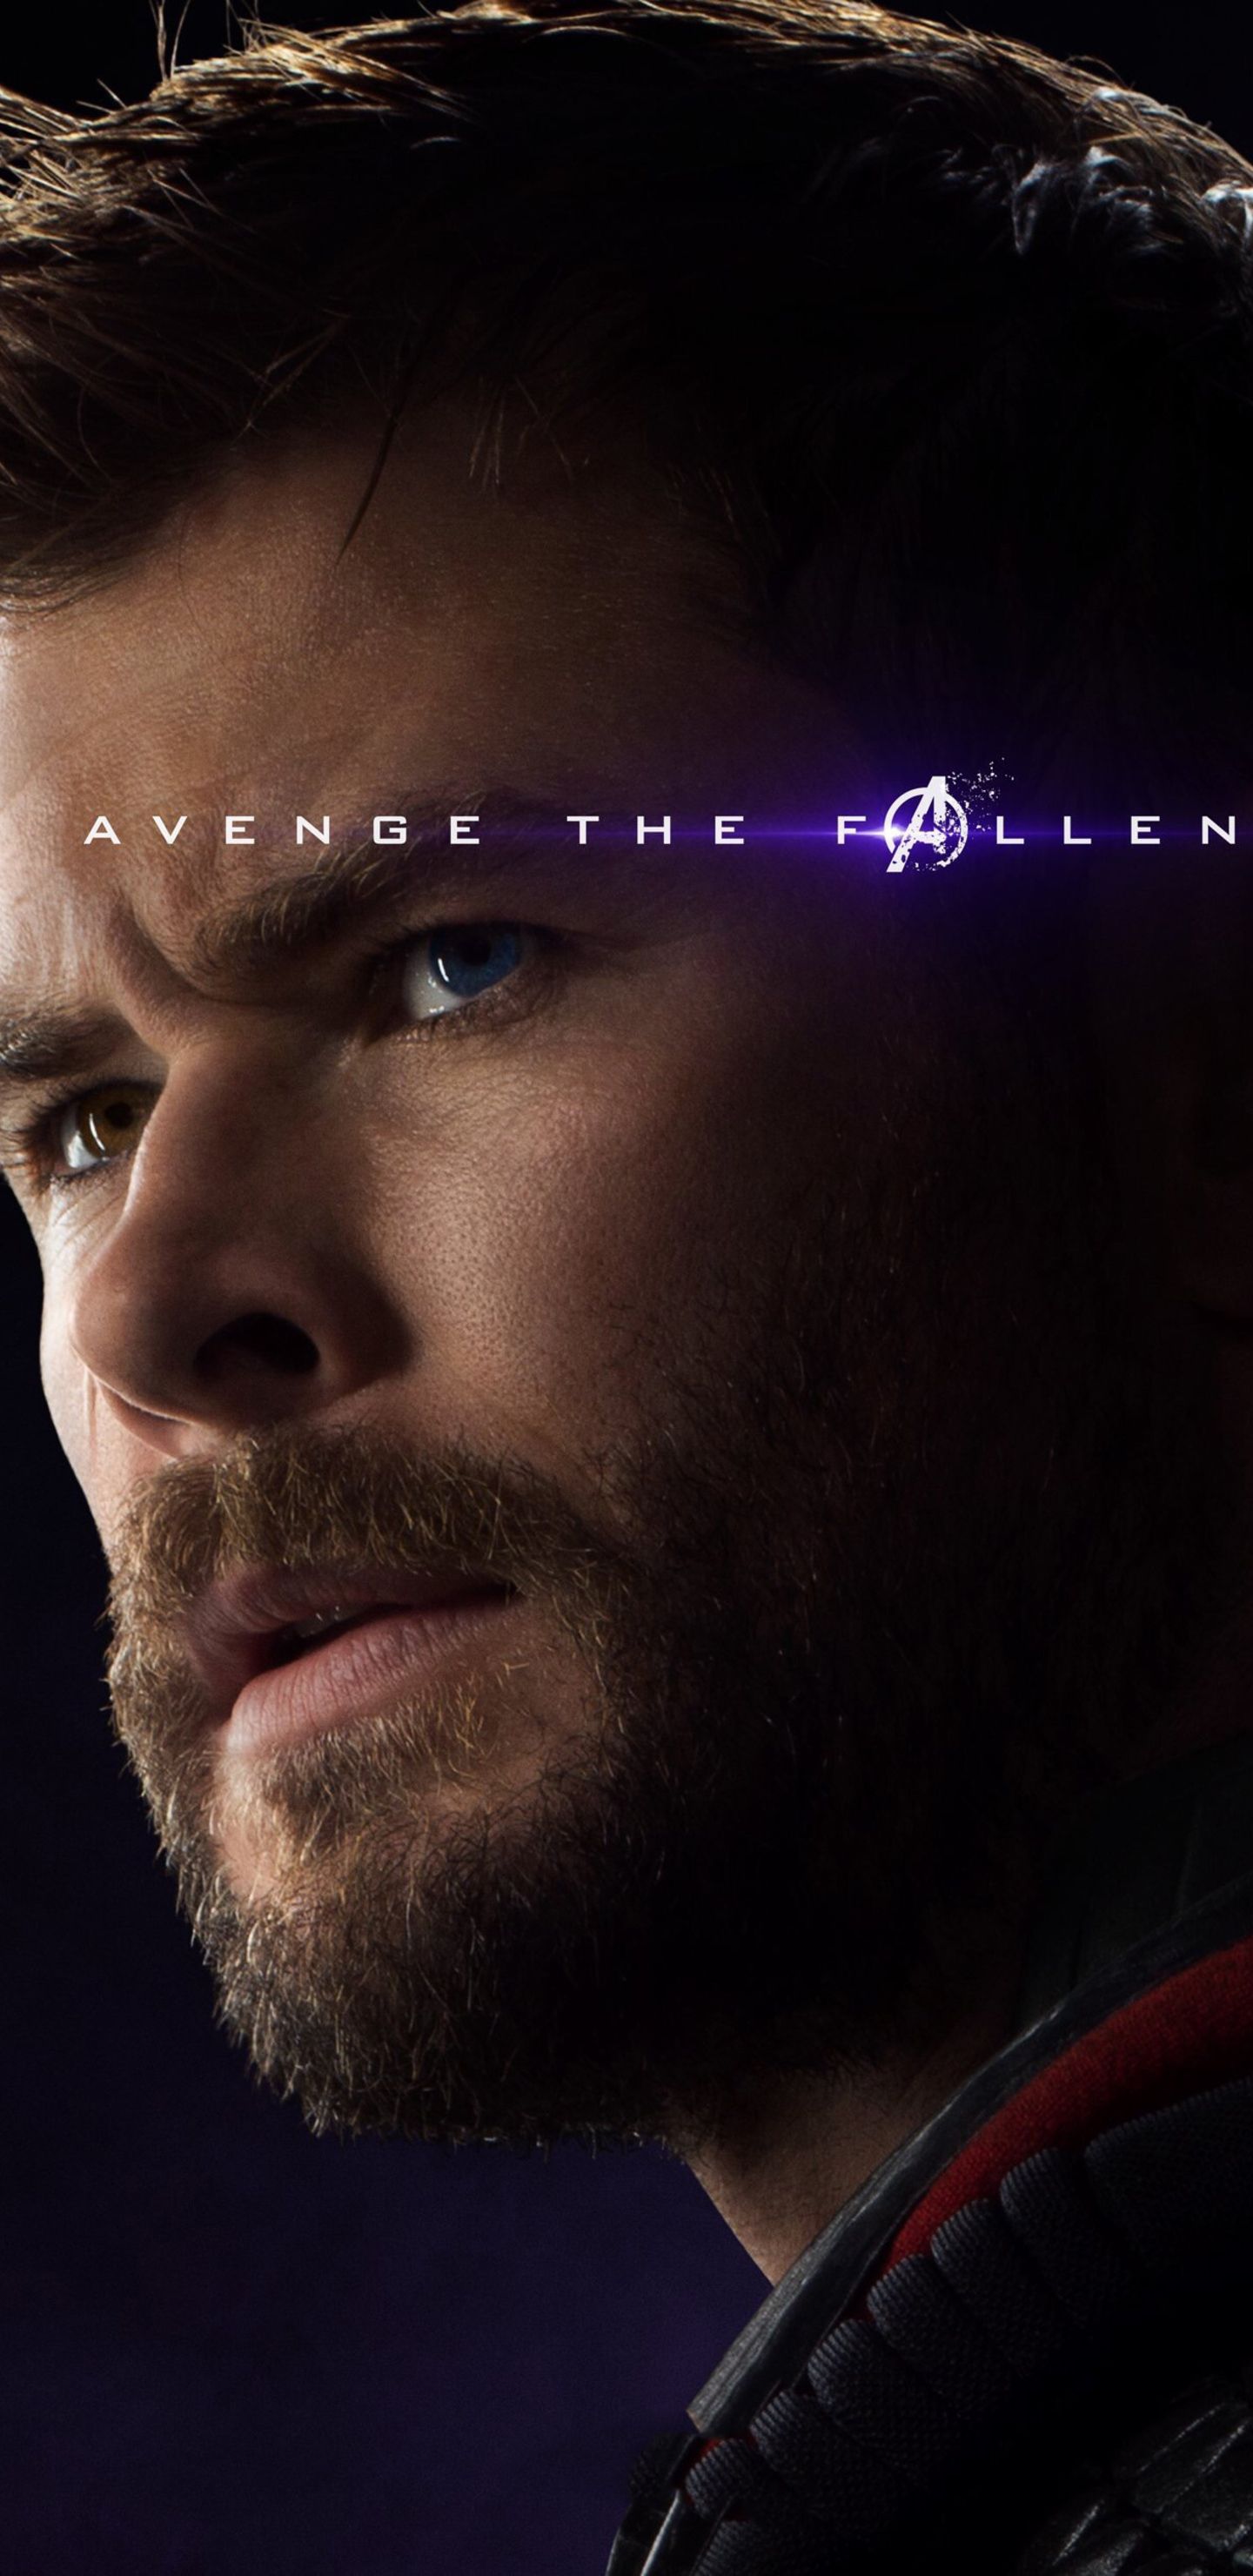 Thor Avengers Endgame 2019 Poster Samsung Galaxy Note 9